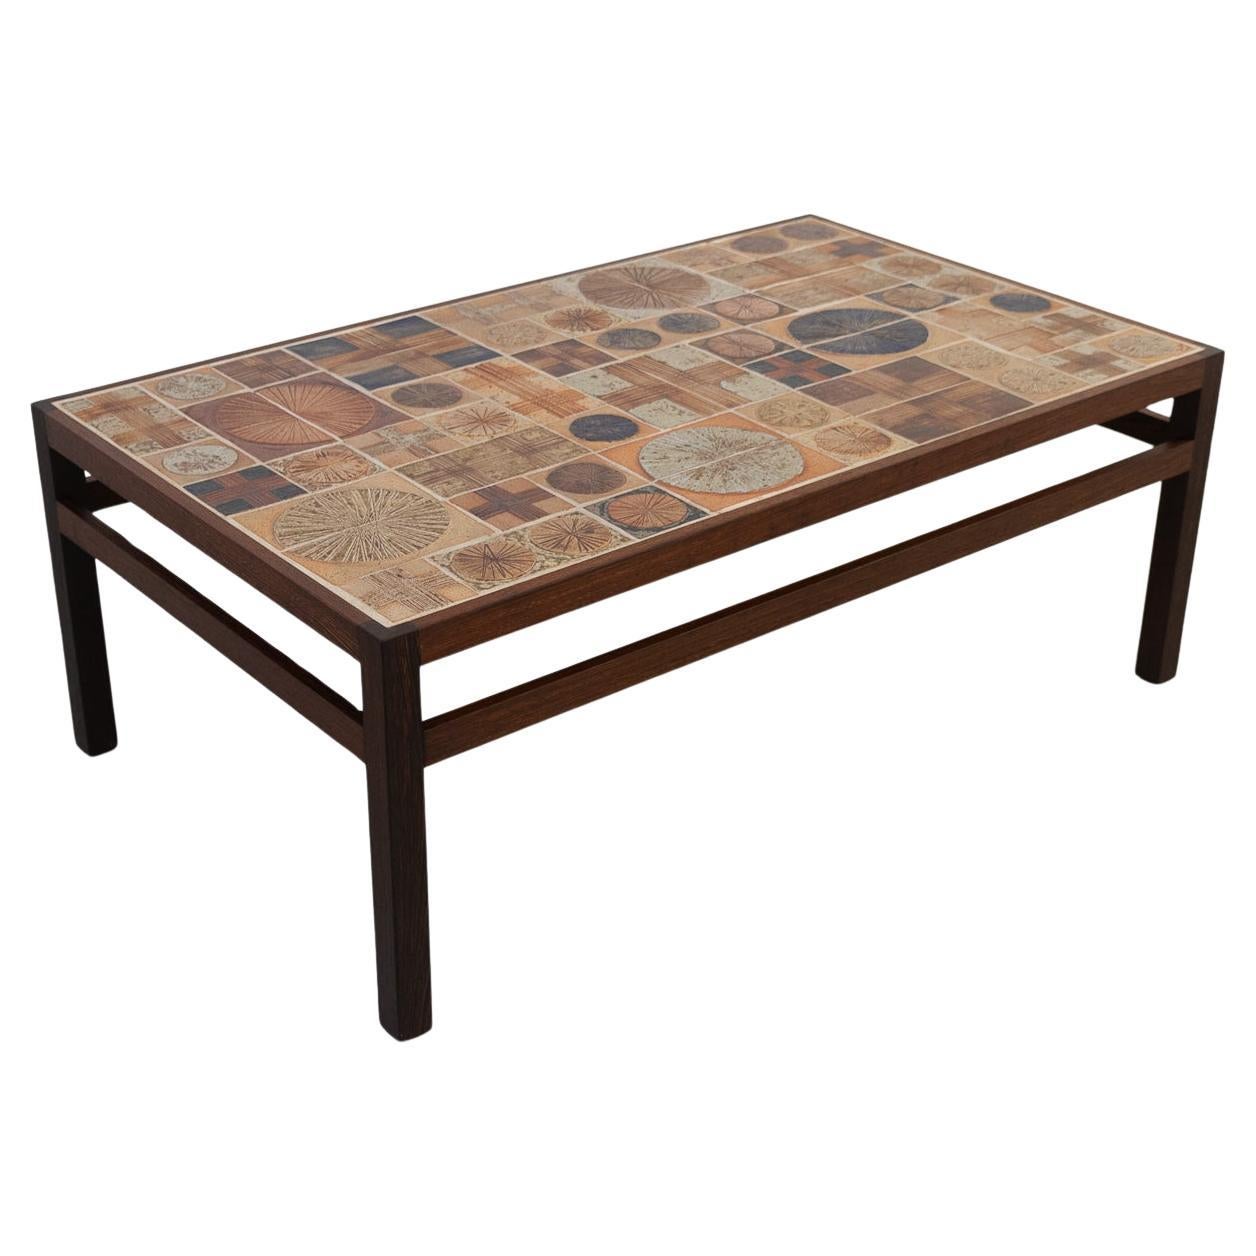 Danish Modern Tue Poulsen Tile Coffee Table in Wengé, 1960s. For Sale